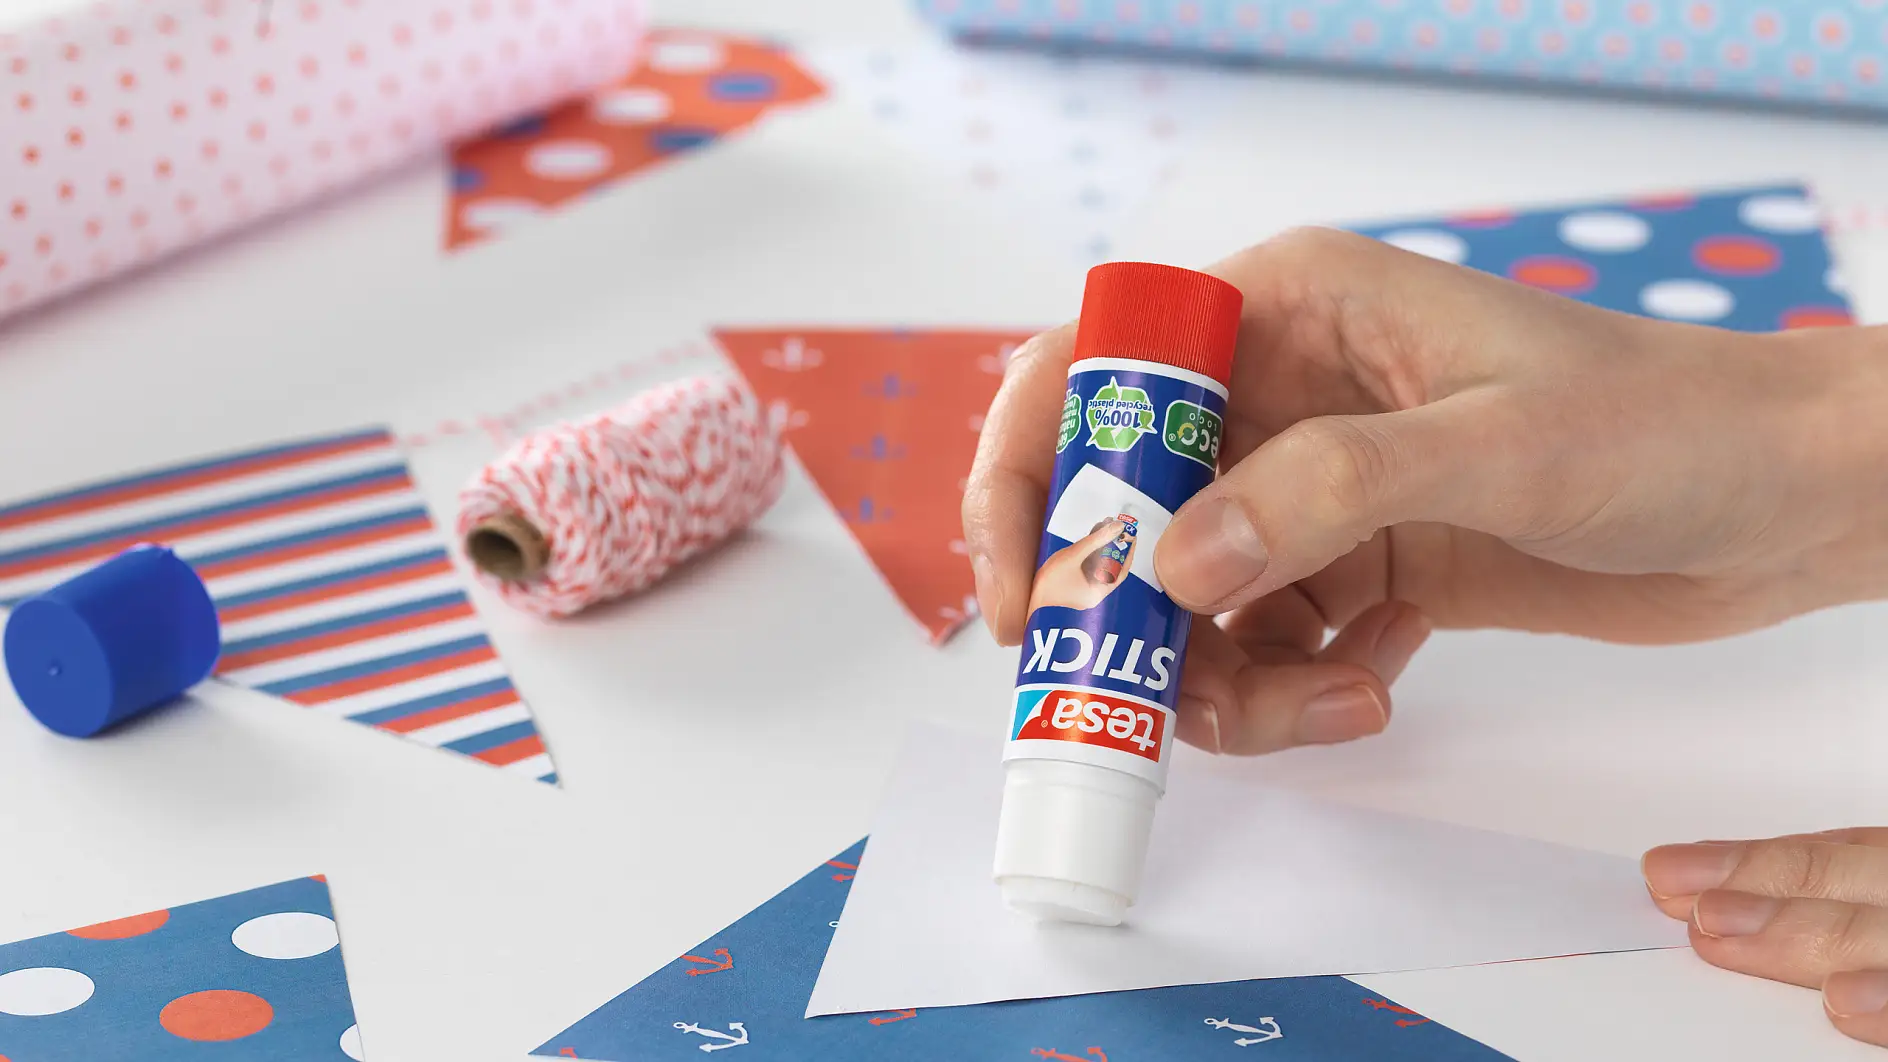 Glue sticks – everyday helpers in the home or office